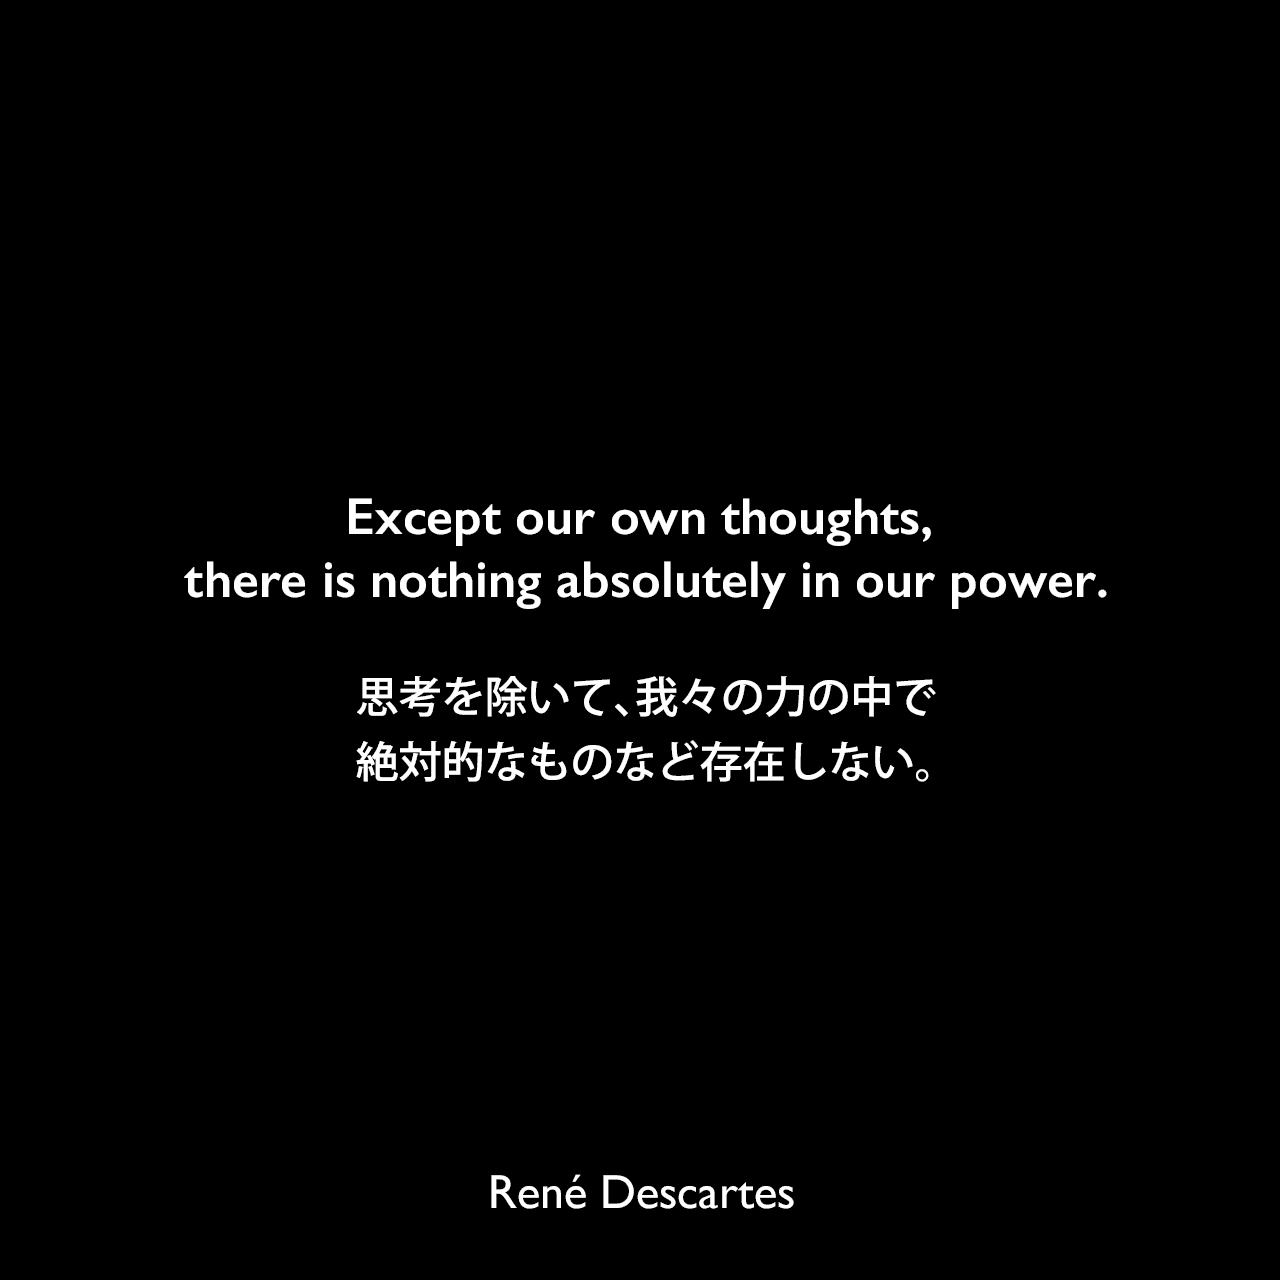 Except our own thoughts, there is nothing absolutely in our power.思考を除いて、我々の力の中で絶対的なものなど存在しない。René Descartes